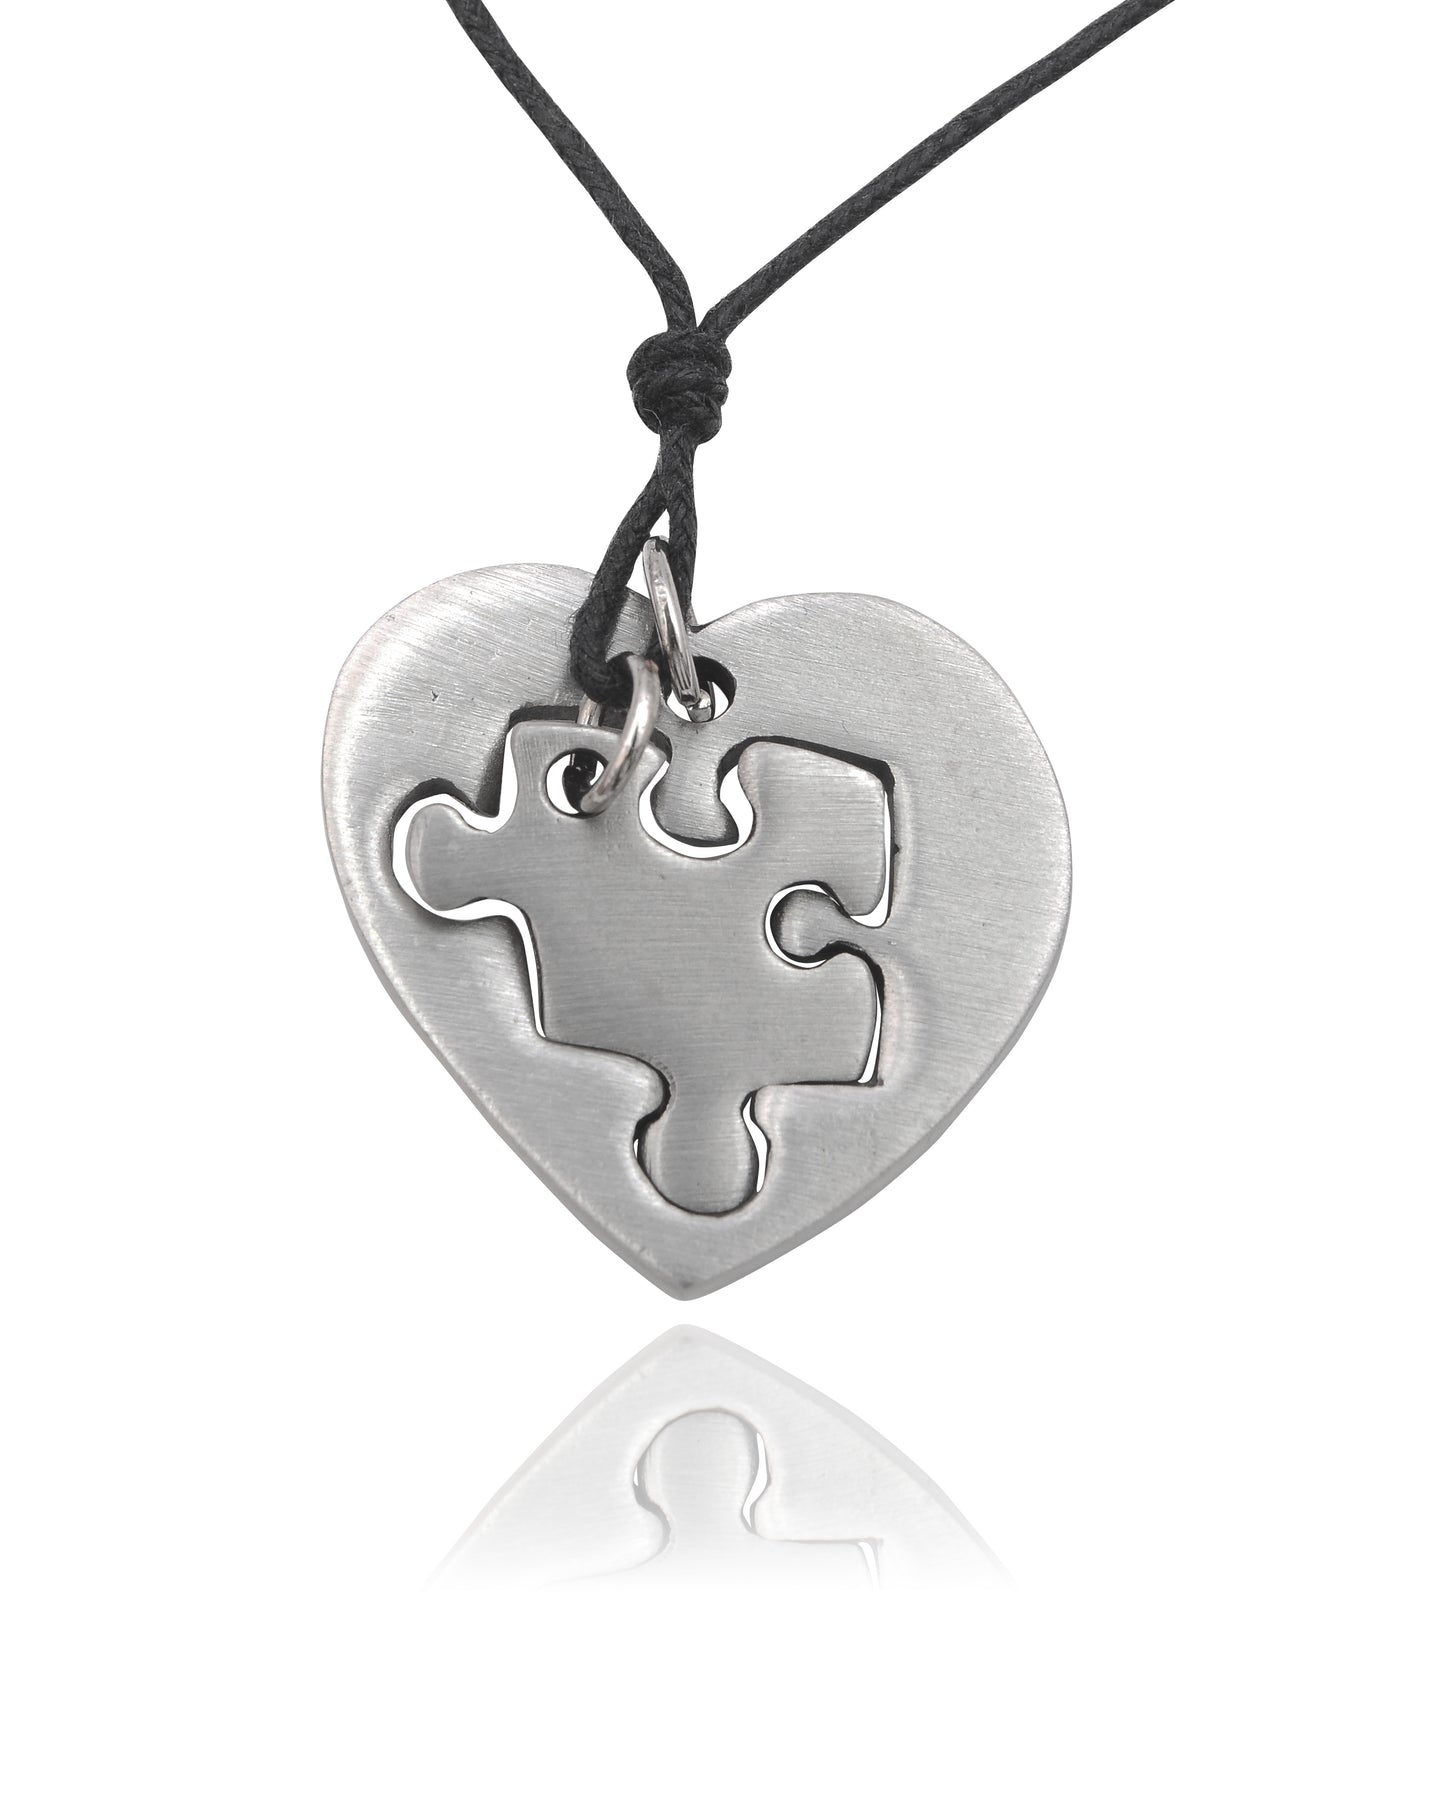 Bestfiend Puzzle Heart Silver Pewter Gold Brass Charm Necklace Pendant Jewelry